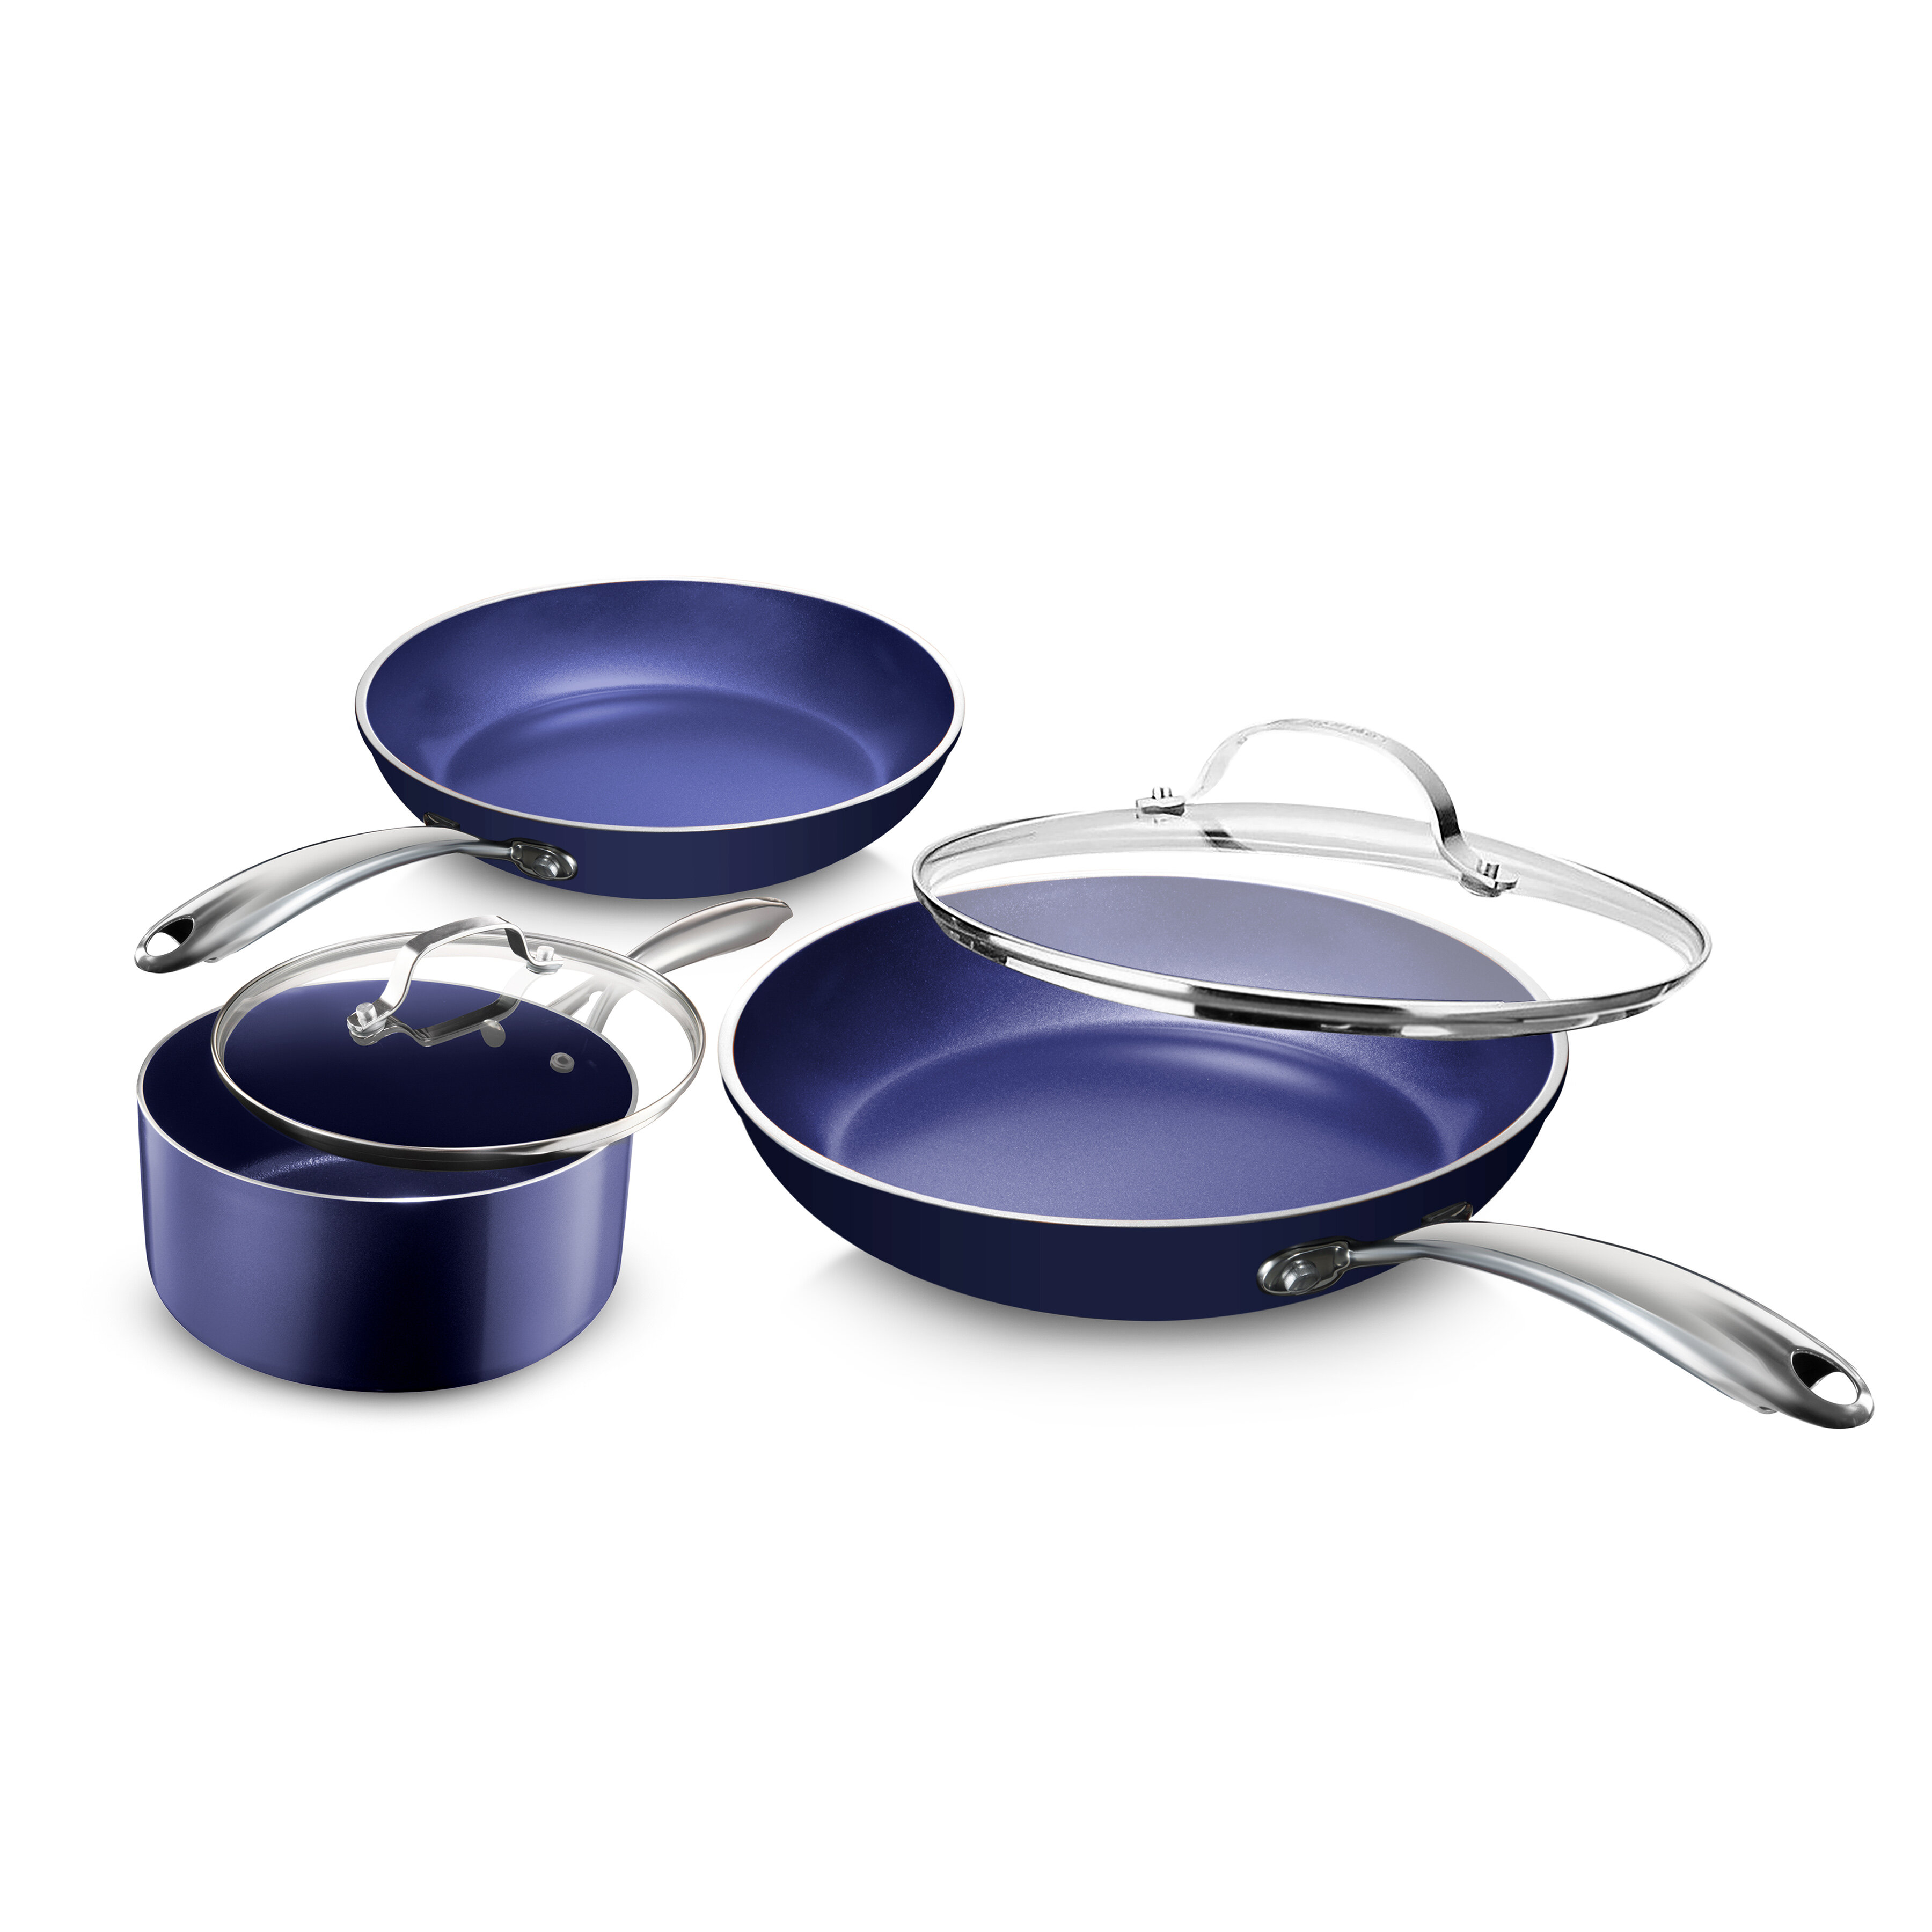 Granitestone Blue 5 Piece Nonstick Cookware Set with Stay Cool